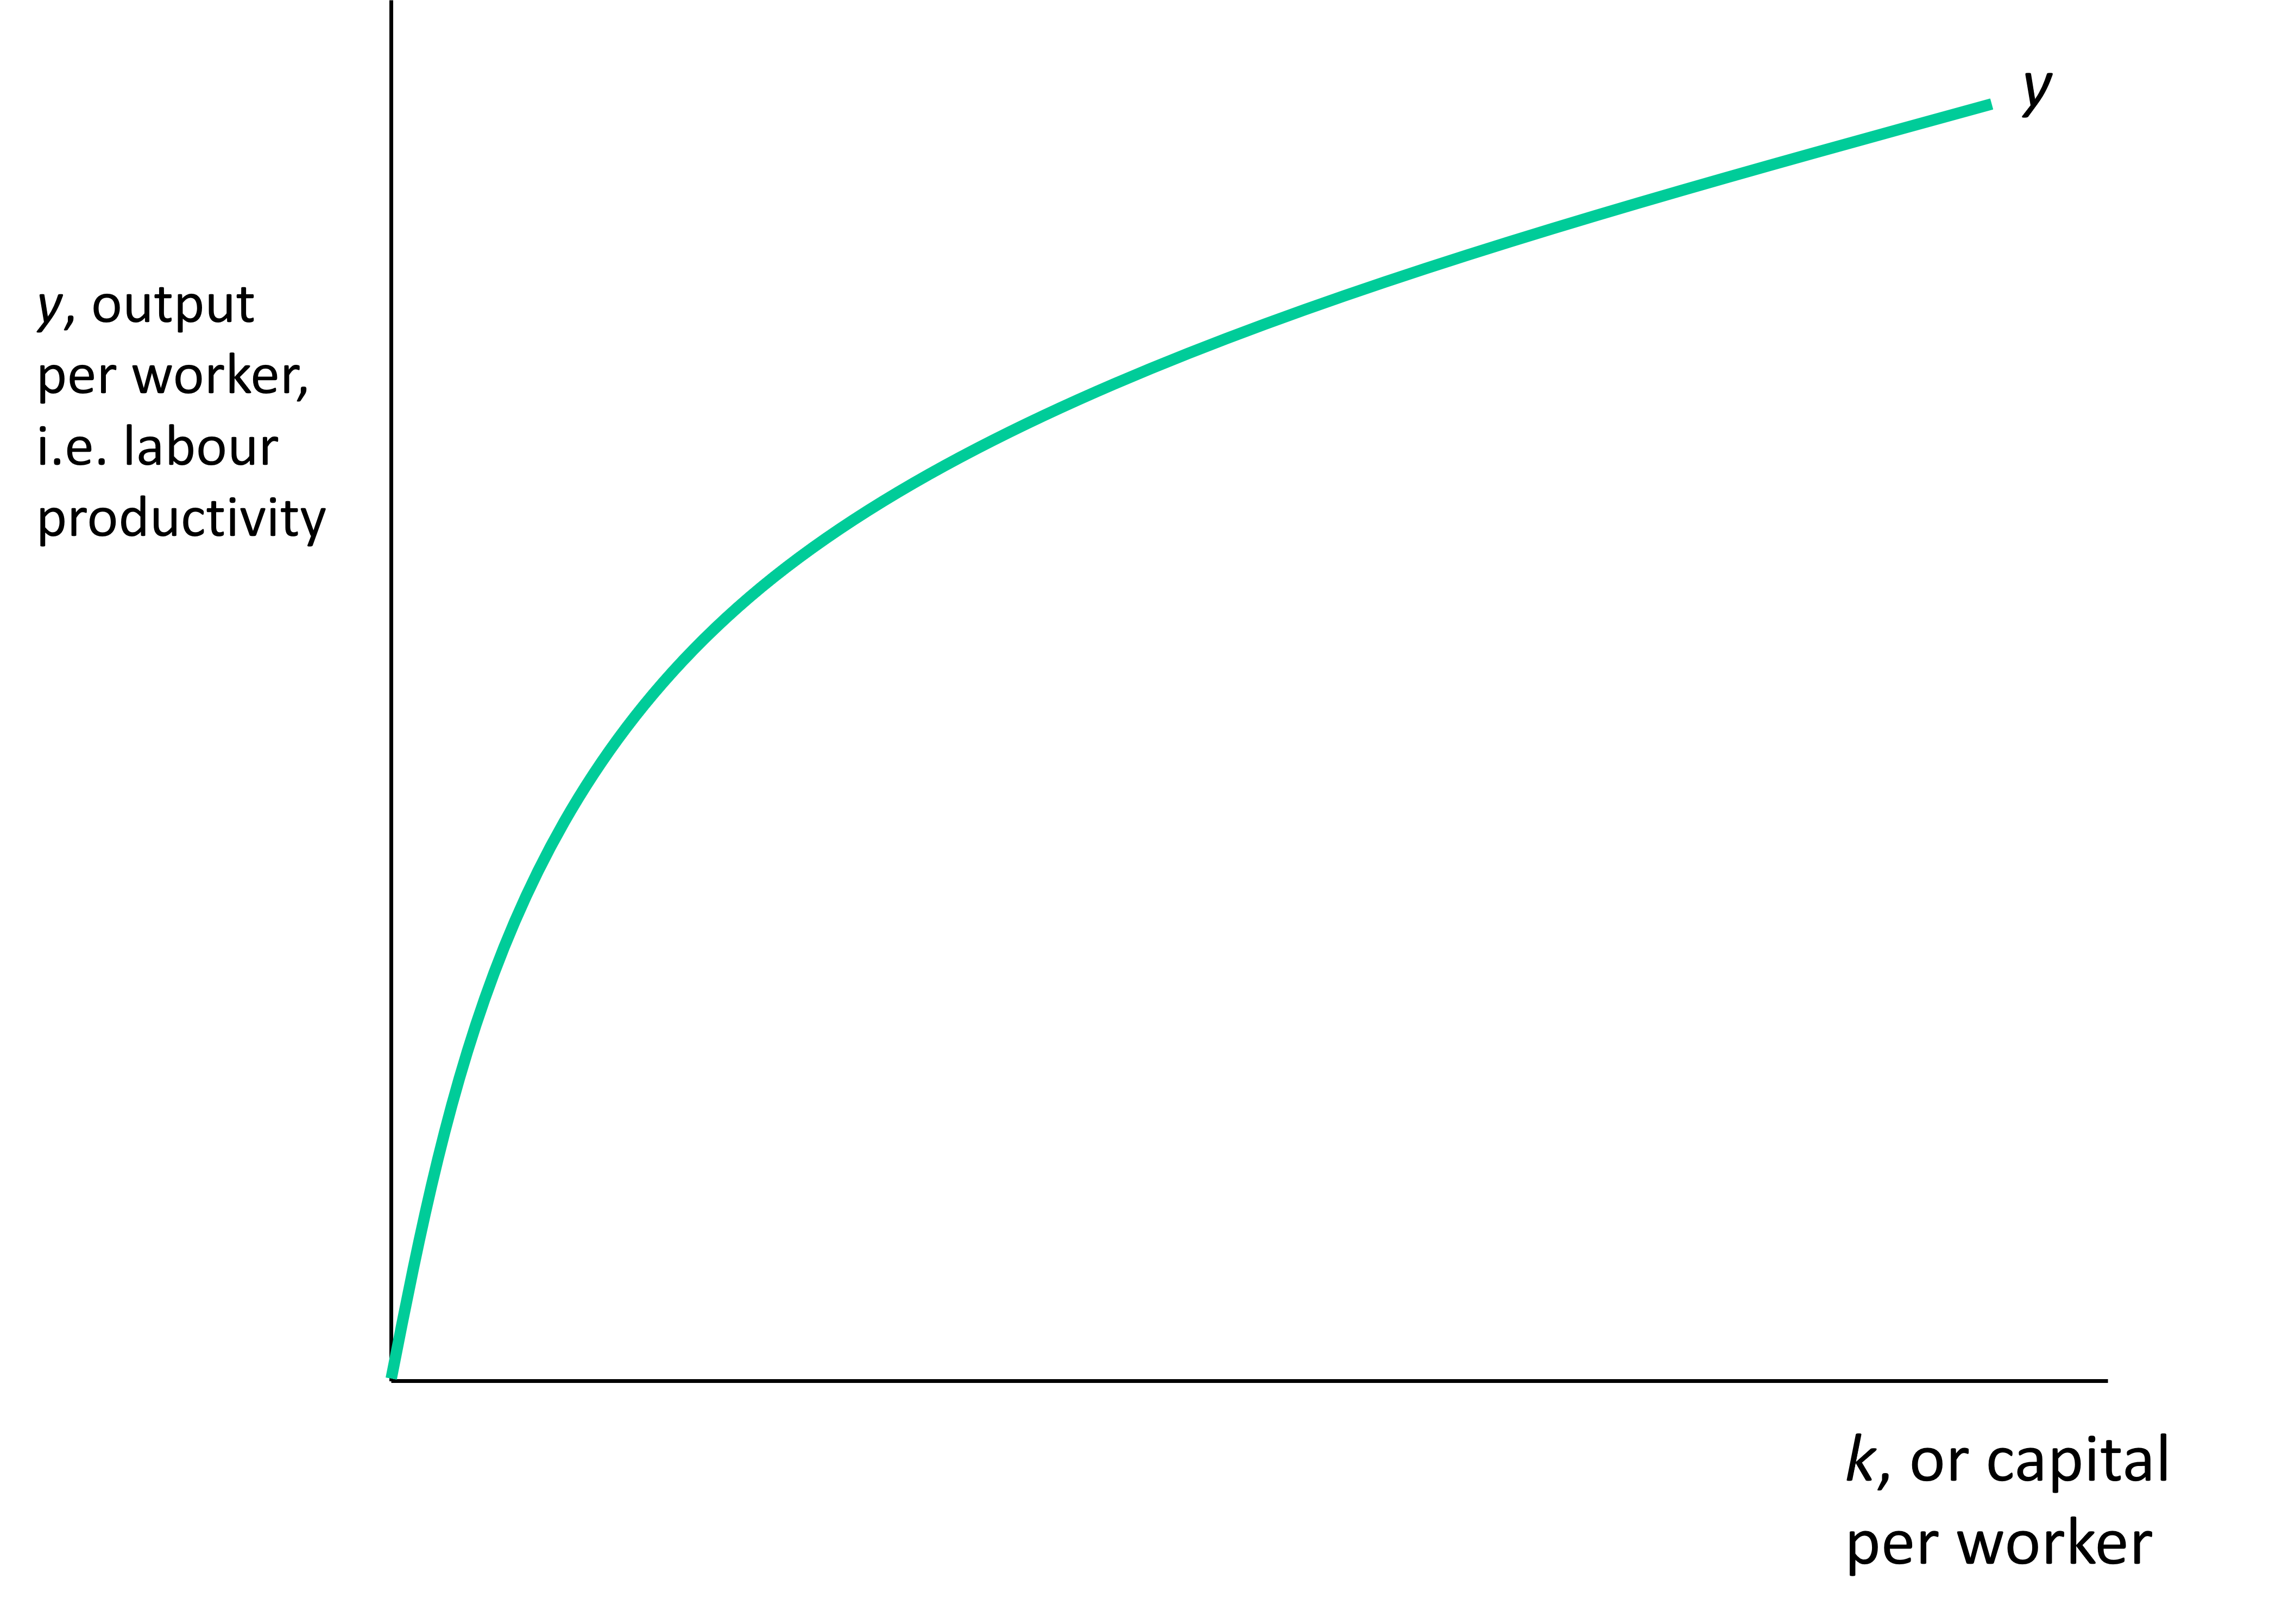 y is on the vertical axis and k is on the horizontal axis. The graph depicts an upward sloping, convex line which is y graphed against k. y exhibits diminishing returns in k.